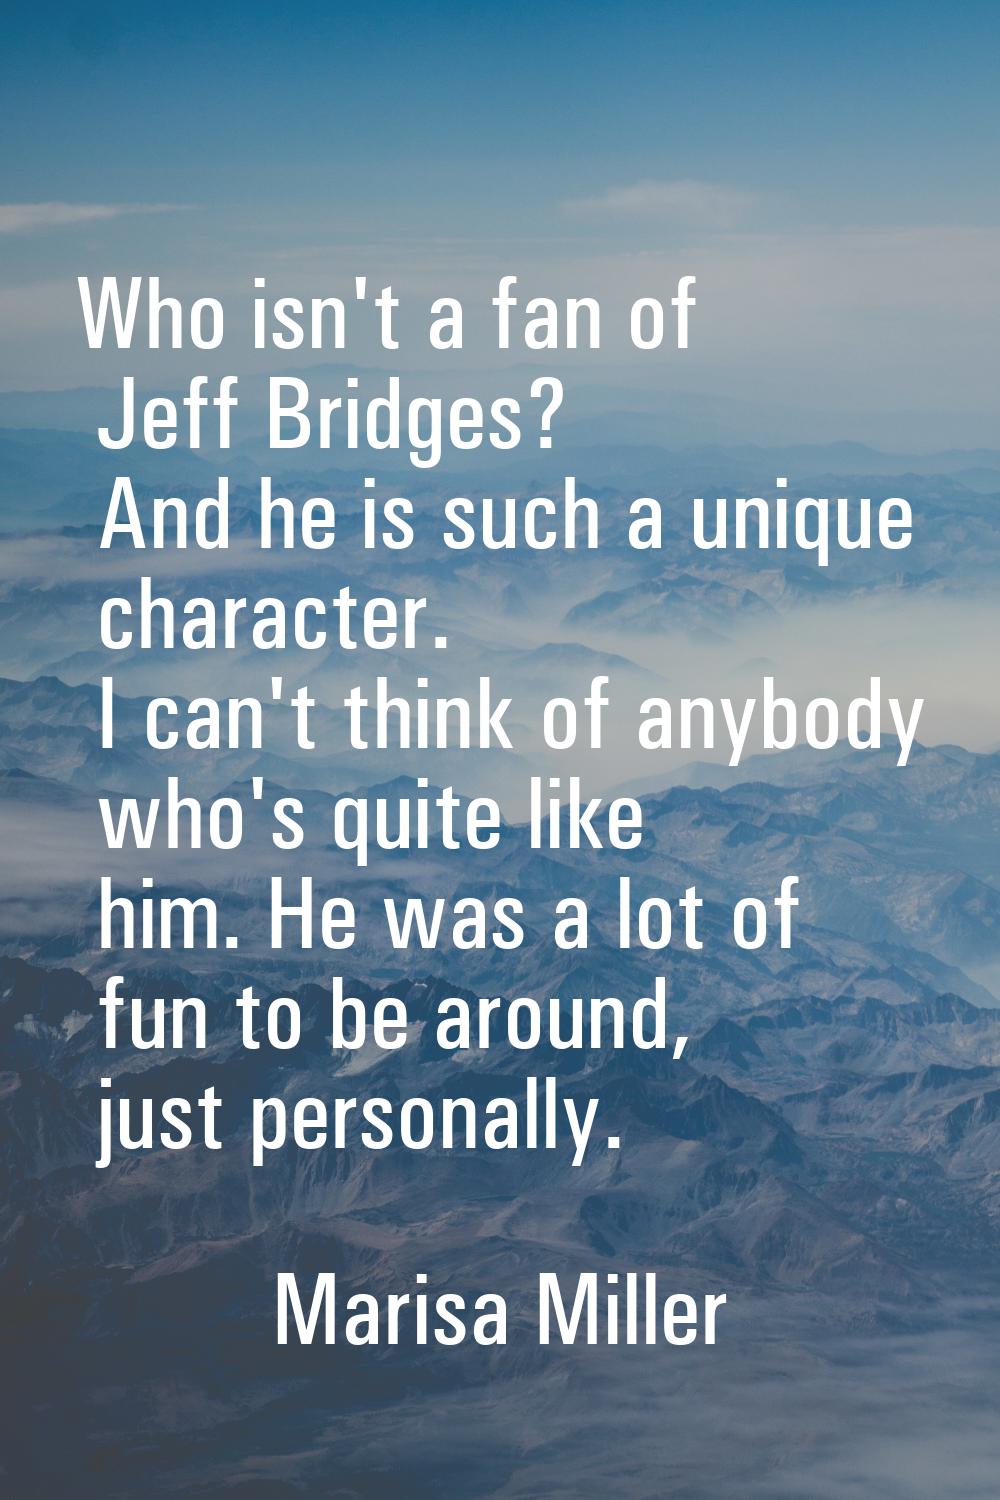 Who isn't a fan of Jeff Bridges? And he is such a unique character. I can't think of anybody who's 